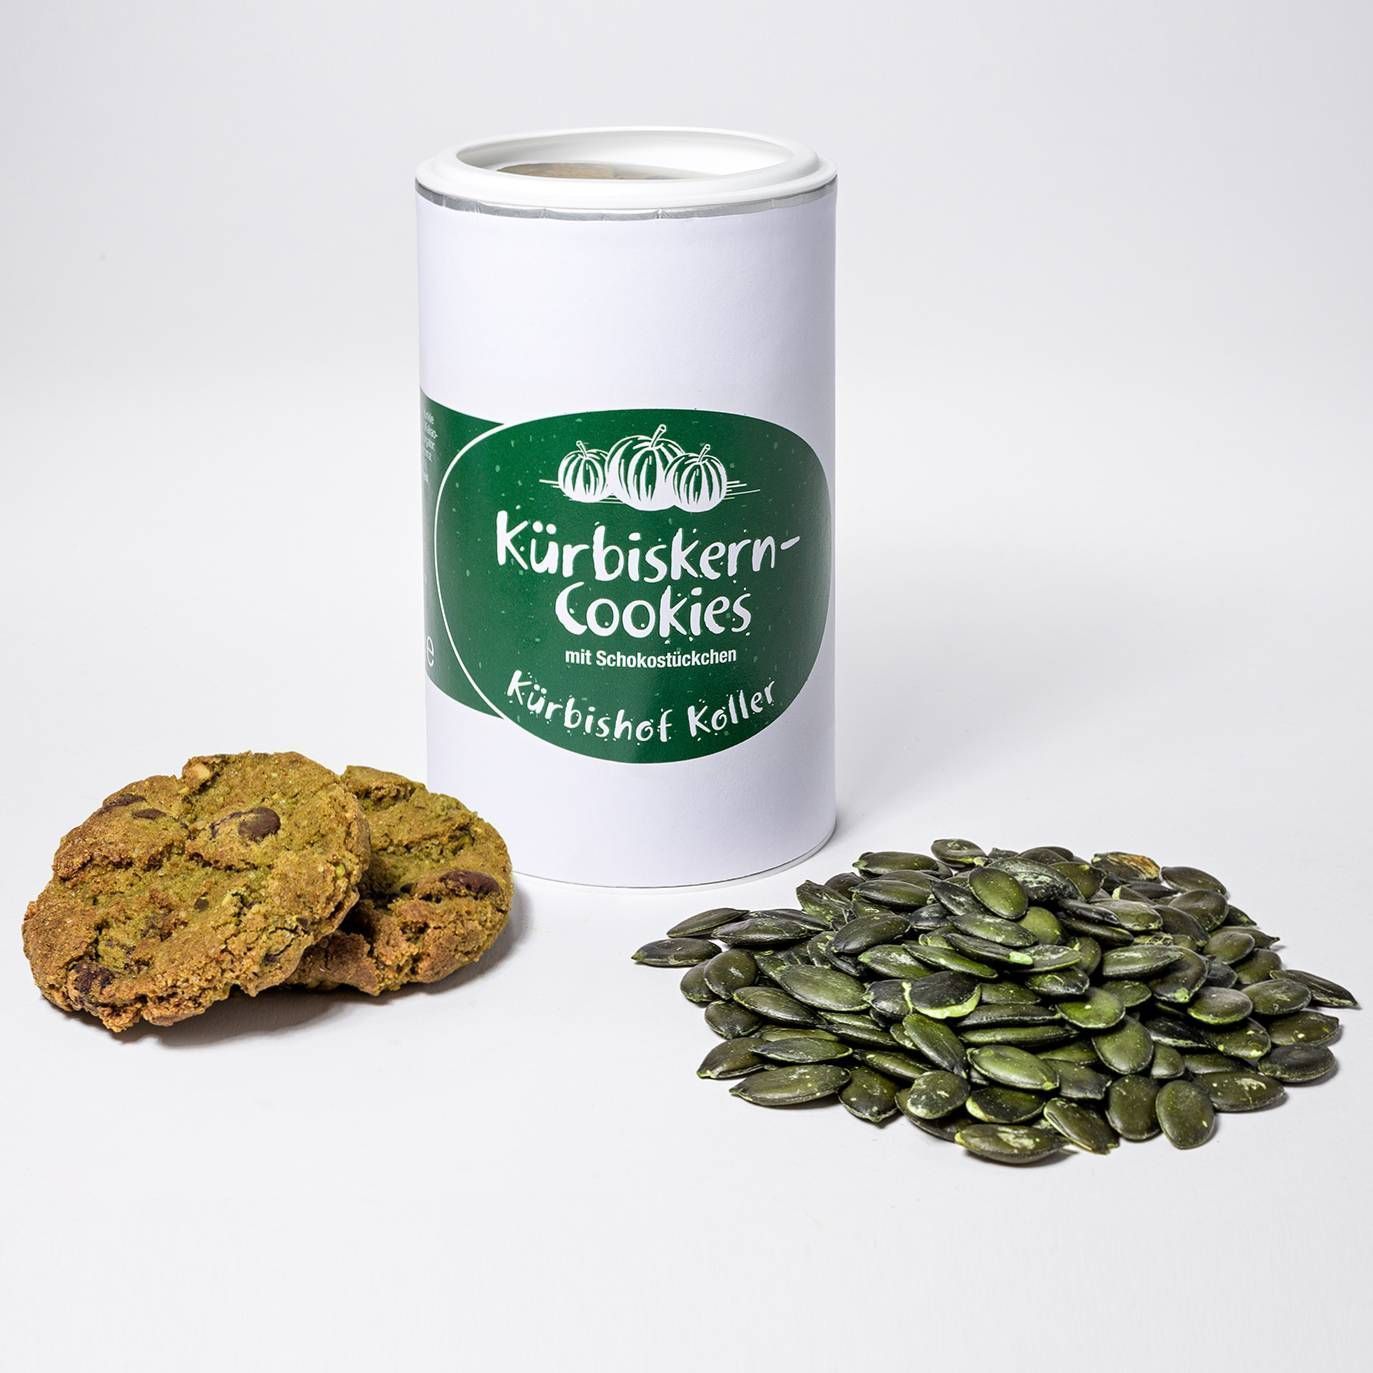 Pumpkin Seed Cookies with Chocolate Chips in Qatar